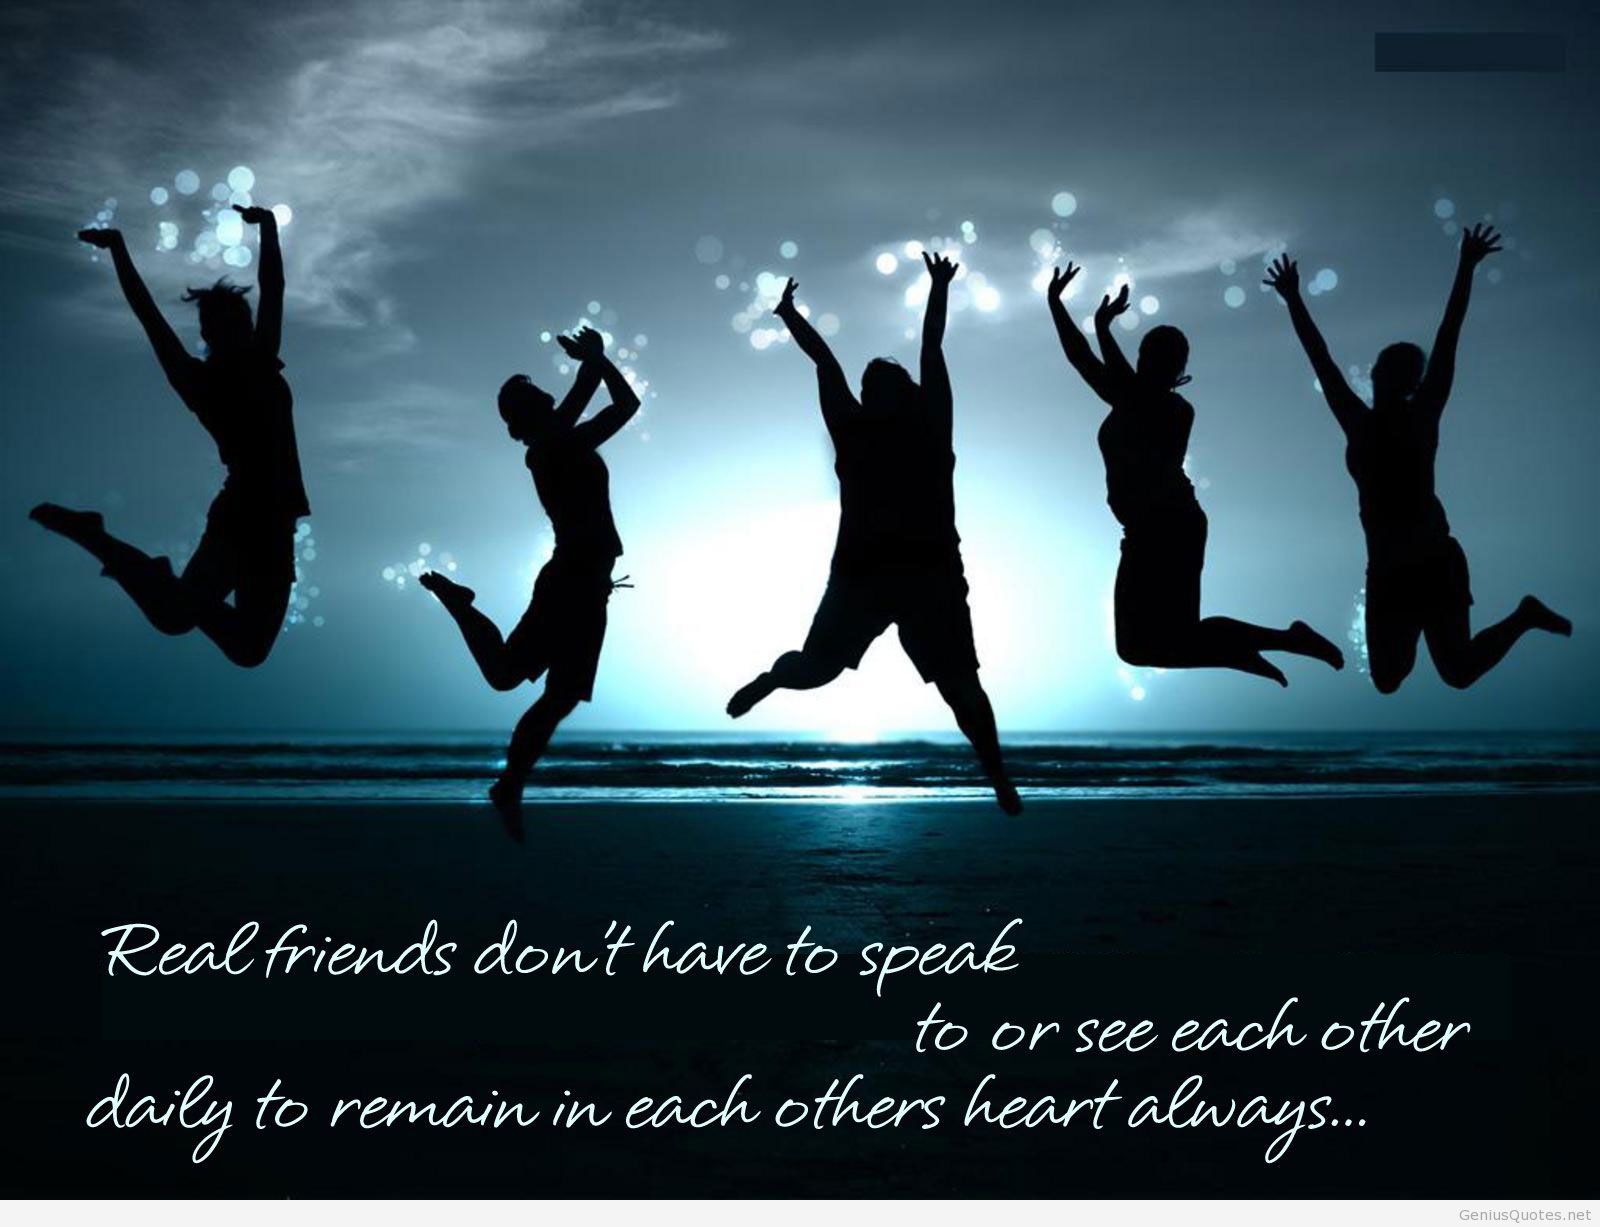 Best Friends Forever Quotes Image And Wallpaper